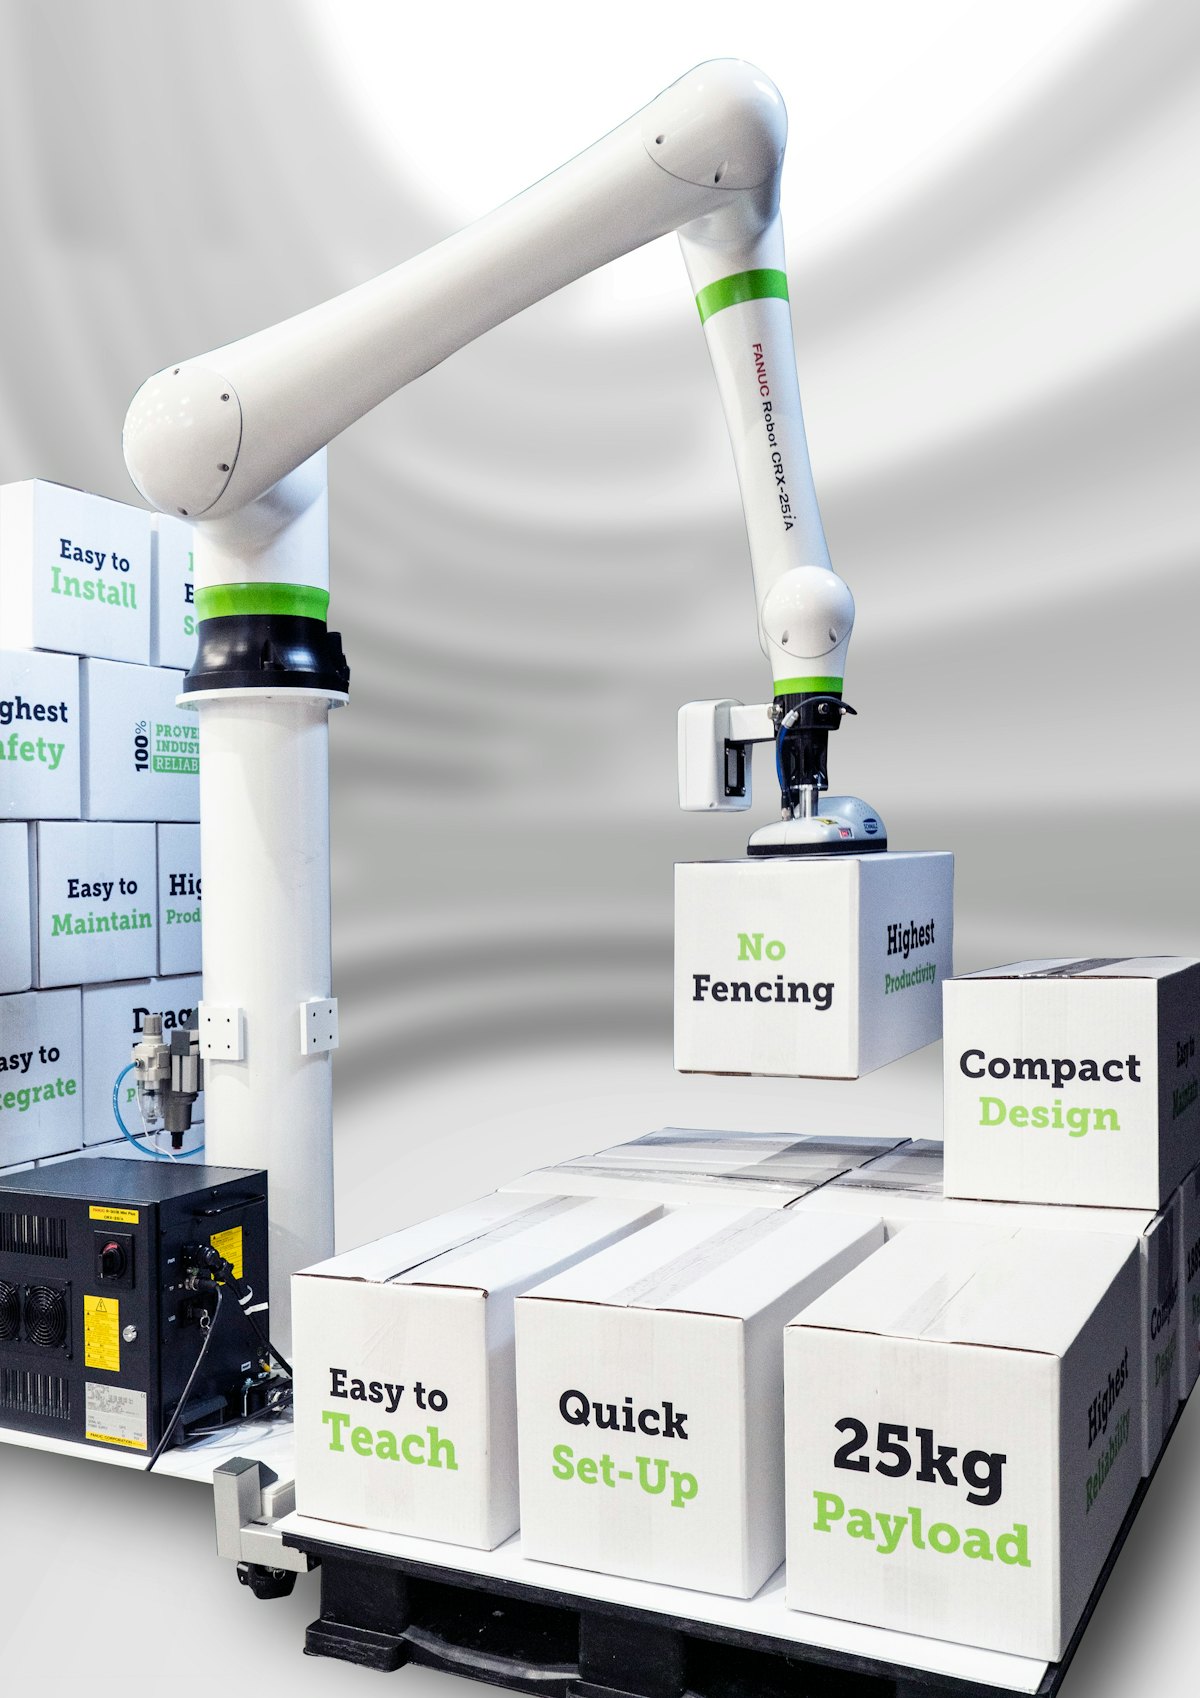 FANUC to Demonstrate Robot and Cobot Solutions PACK EXPO Packaging World